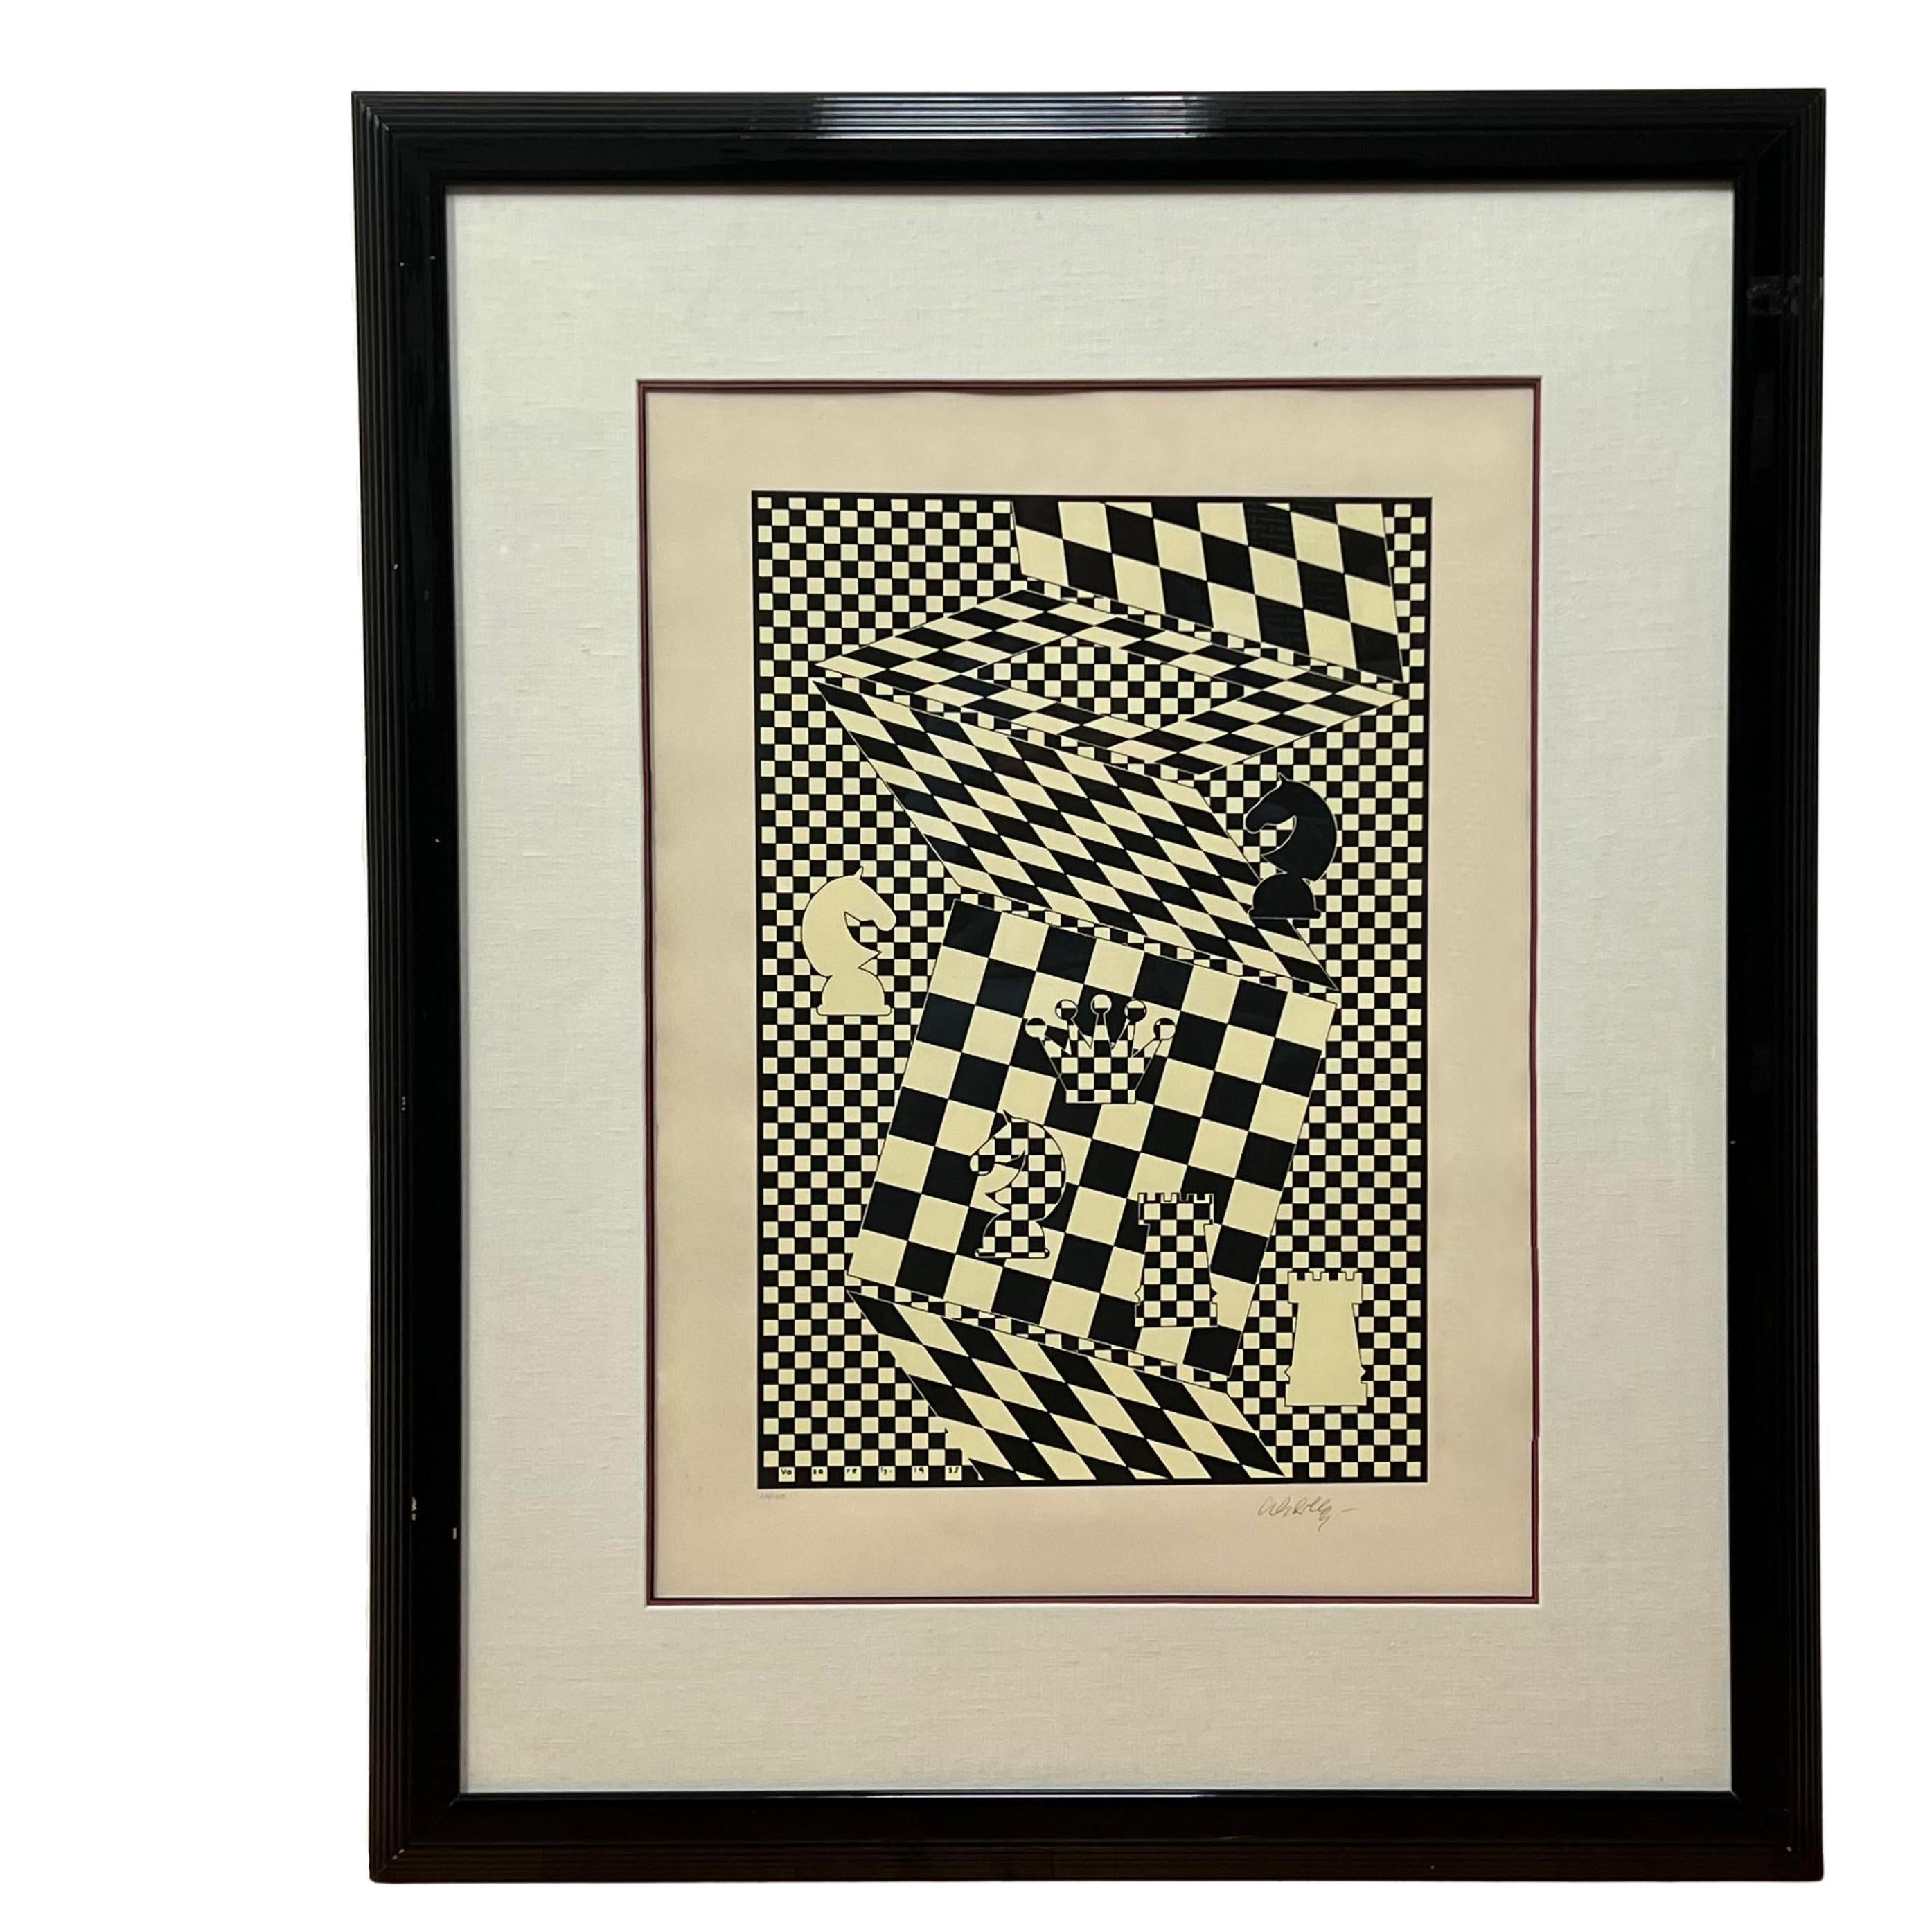 Victor Vasarely, the Hungarian-French artist and pioneer of the Op Art movement, is renowned for integrating geometric abstraction and optical illusions in his artwork. The Chessboard, an original lithograph from 1969, hand-signed and numbered in